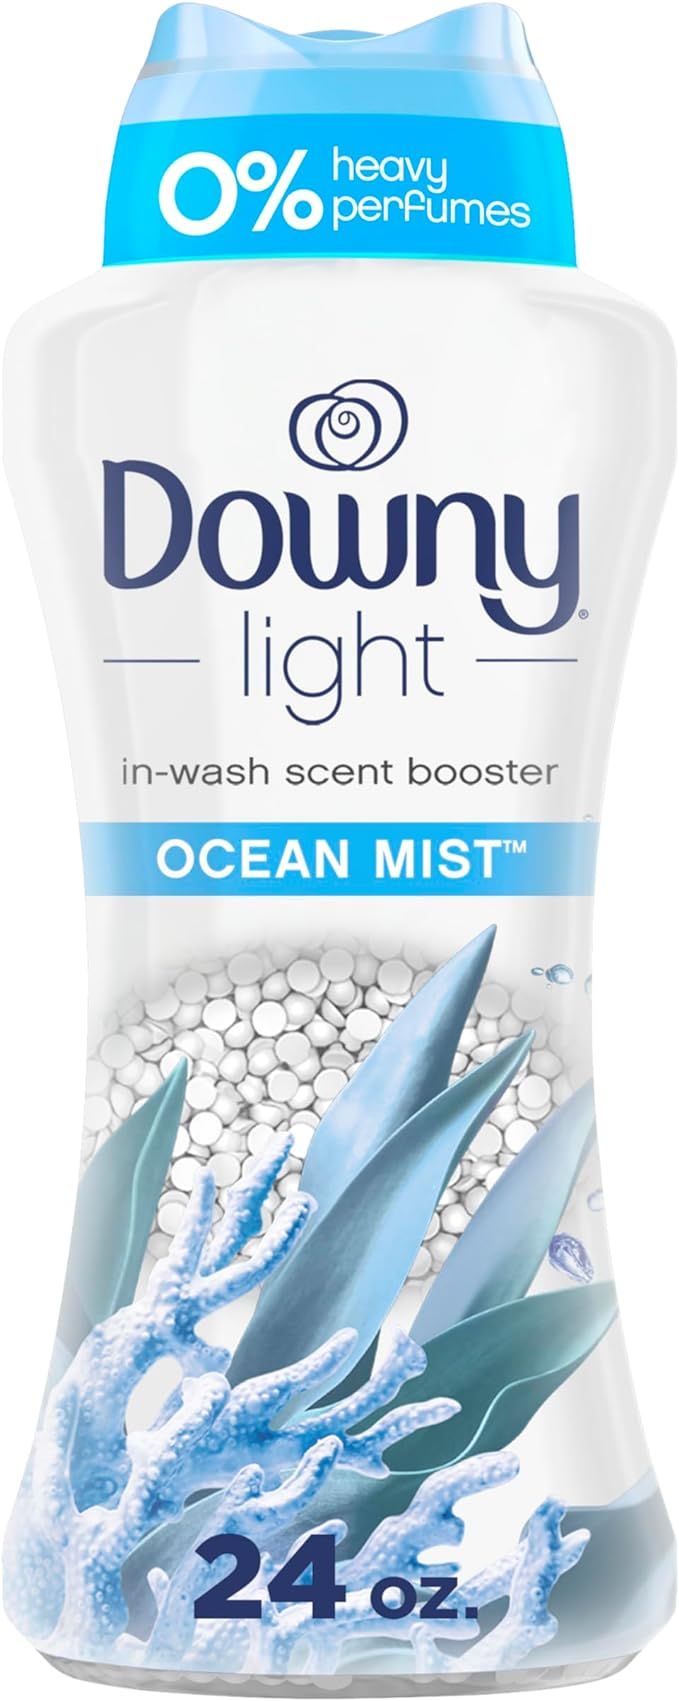 Downy Light Laundry Scent Booster Beads for Washer, Ocean Mist, 24 oz, with No Heavy Perfumes | Amazon (US)